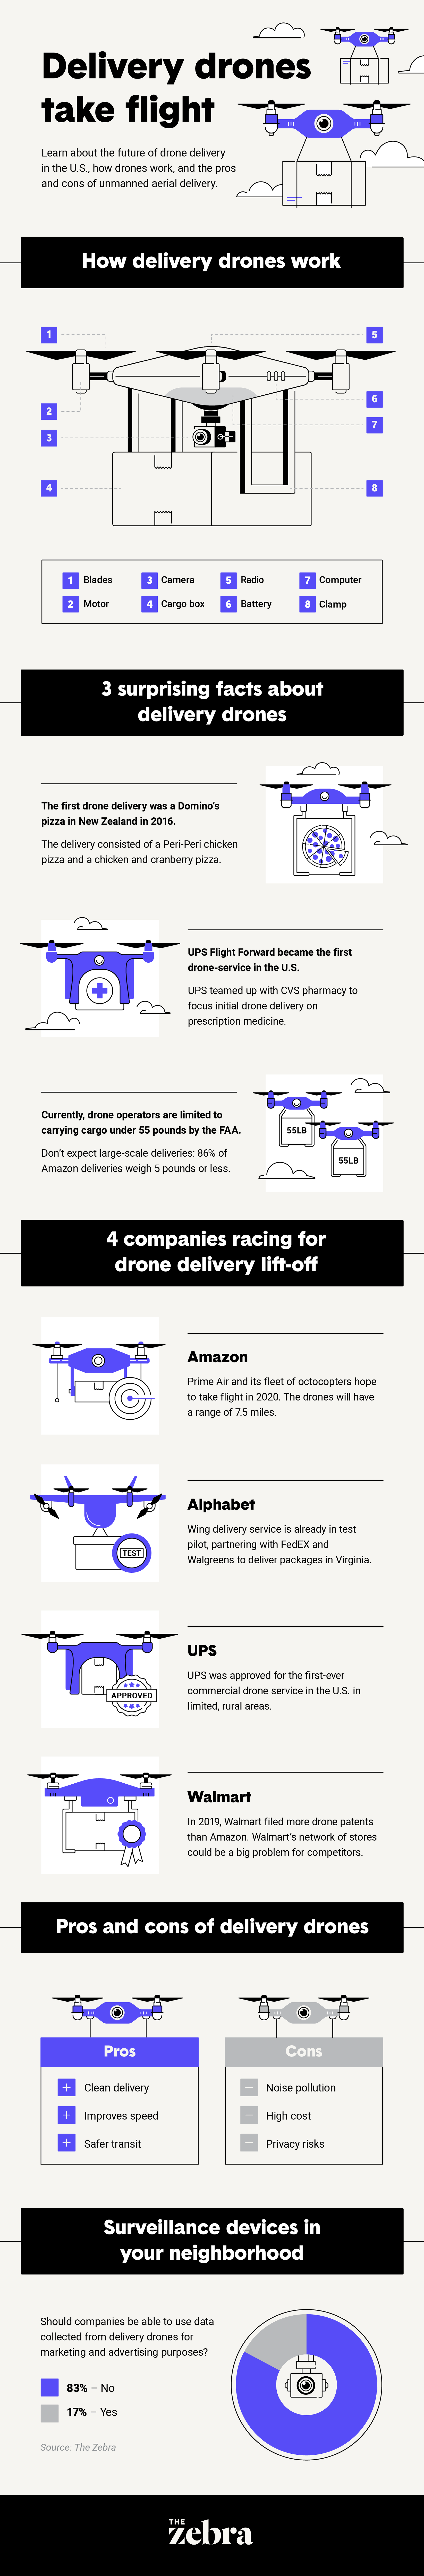 pros and cons delivery drones